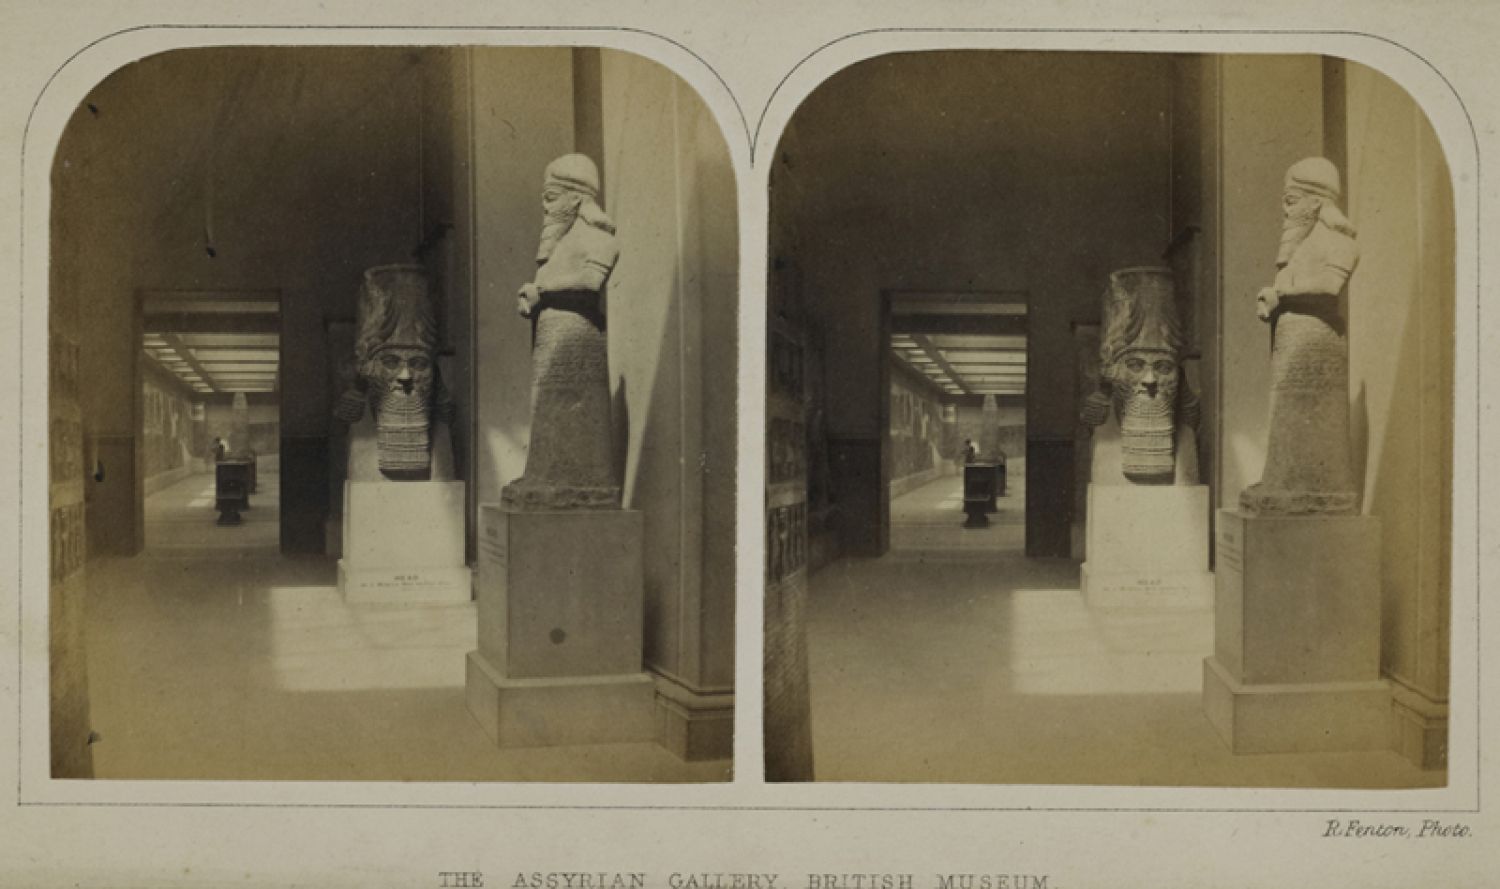 Roger Fenton, «The Assyrian Gallery, British Museum». Stereoscopic pair of photographs, c. 1850s